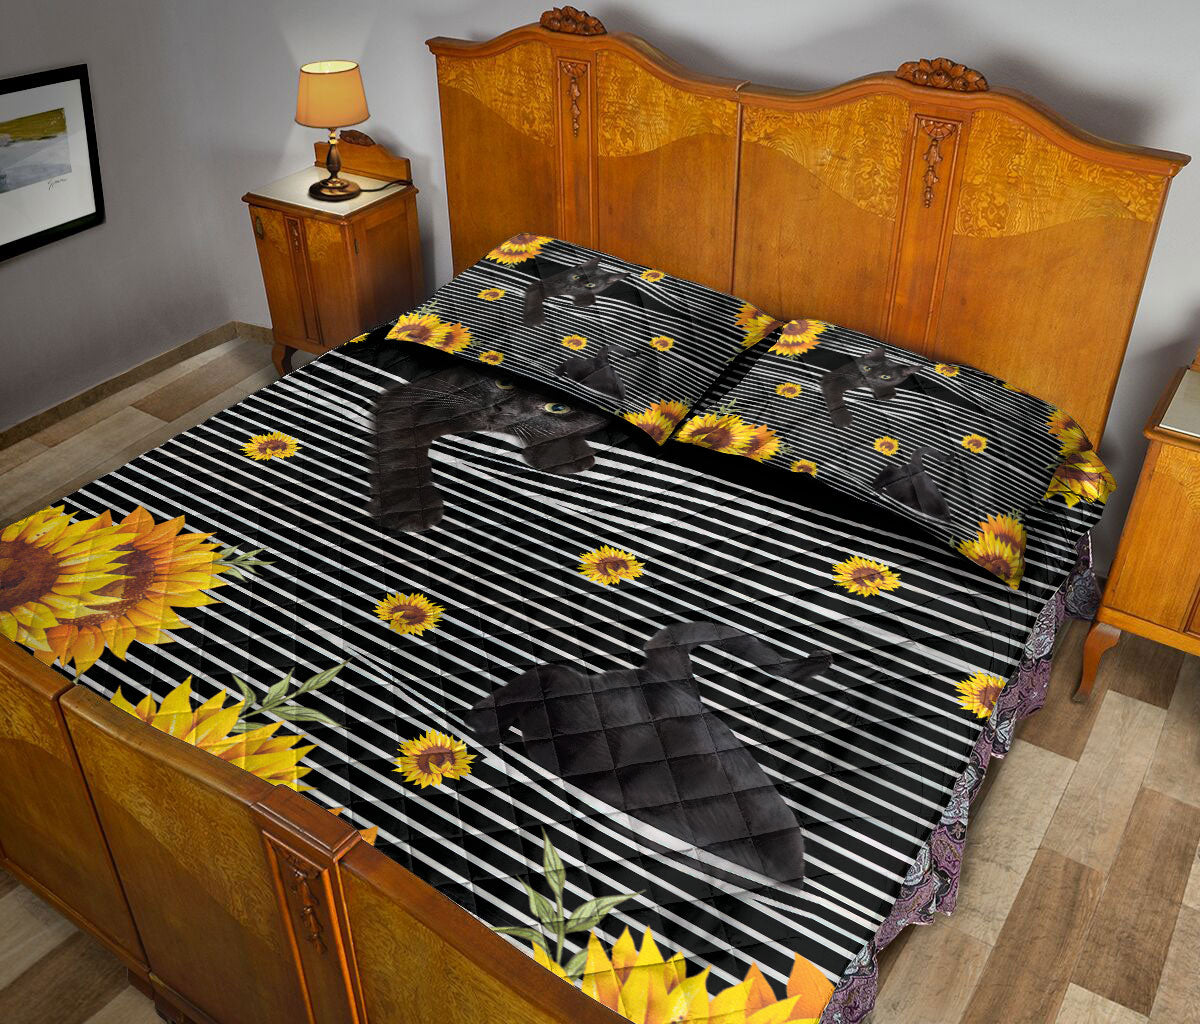 Ohaprints-Quilt-Bed-Set-Pillowcase-Funny-Black-Cat-Cats-Animal-Sunflower-Floral-B&W-Stripe-Pattern-Blanket-Bedspread-Bedding-190-Queen (80'' x 90'')